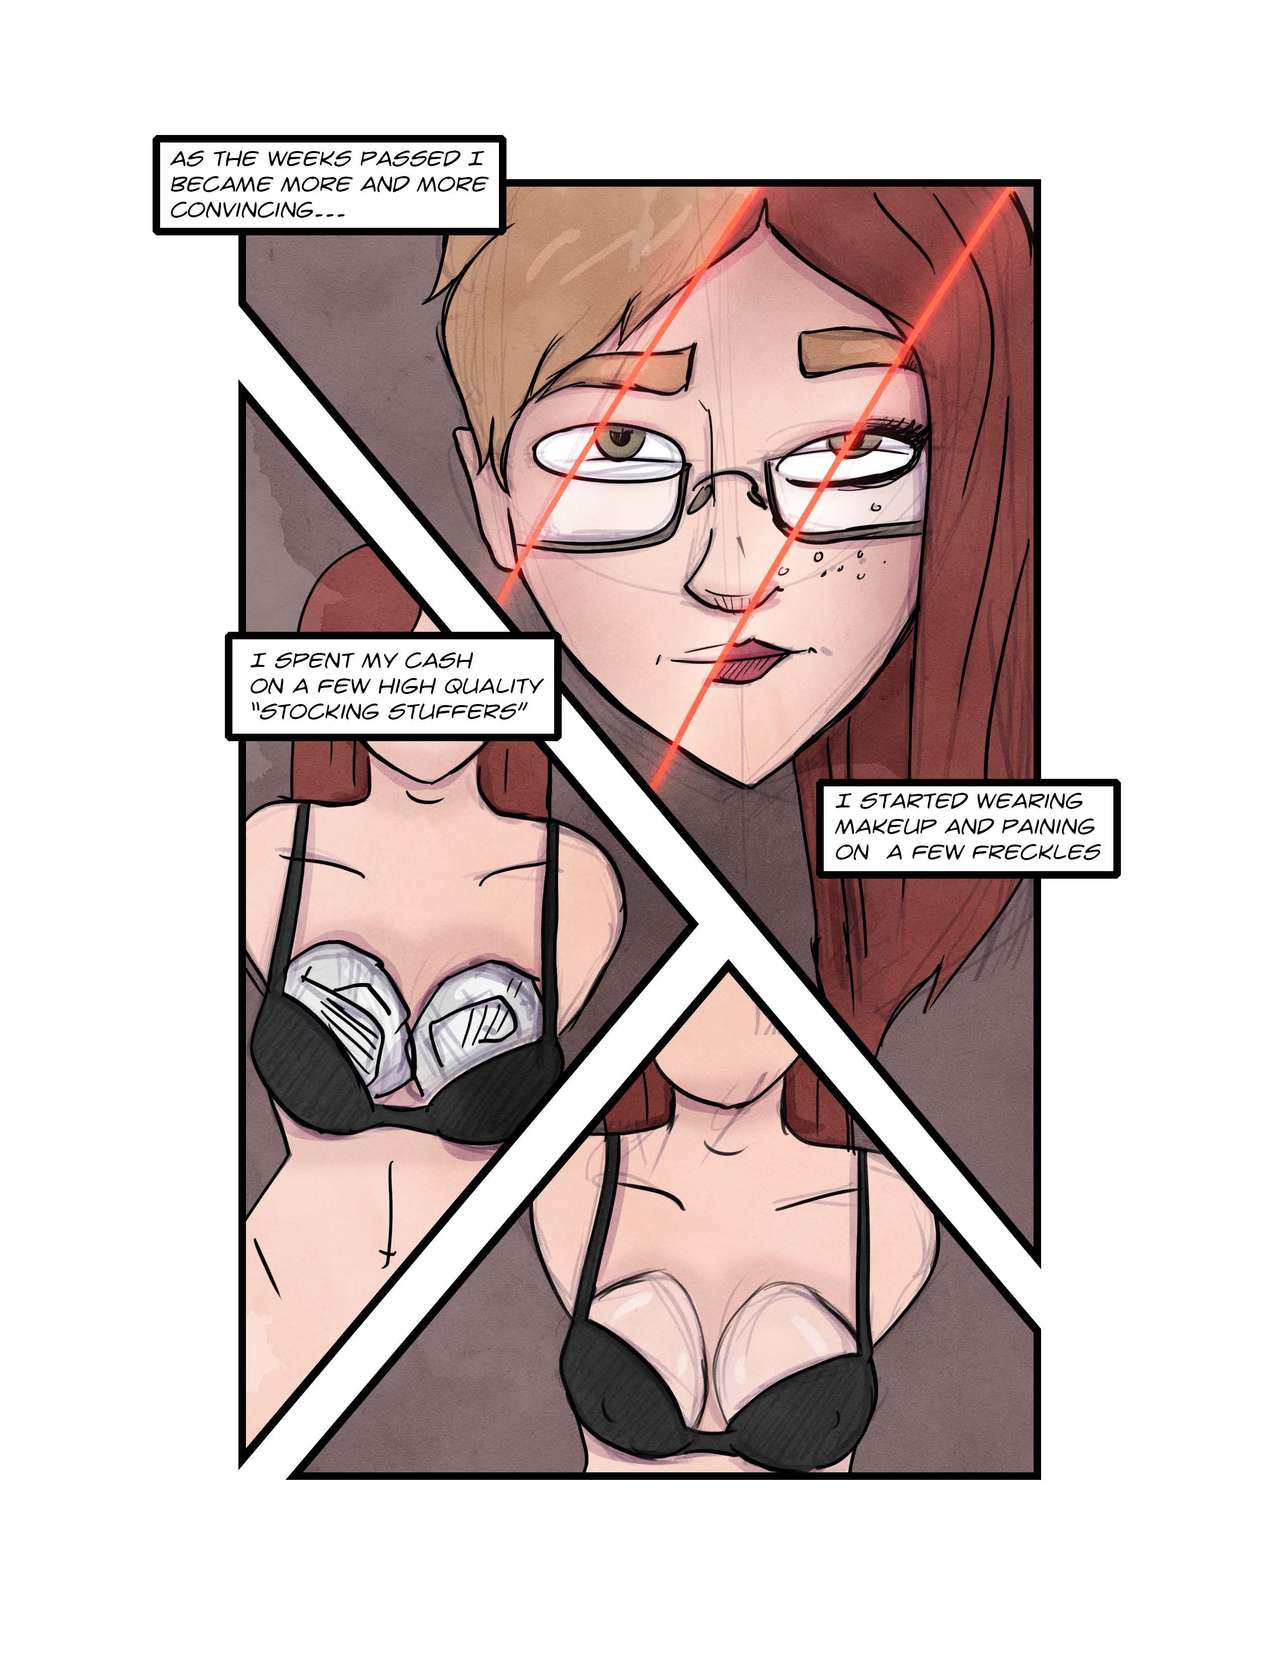 The New Girl 1-5 - Page 9 - HentaiZap 